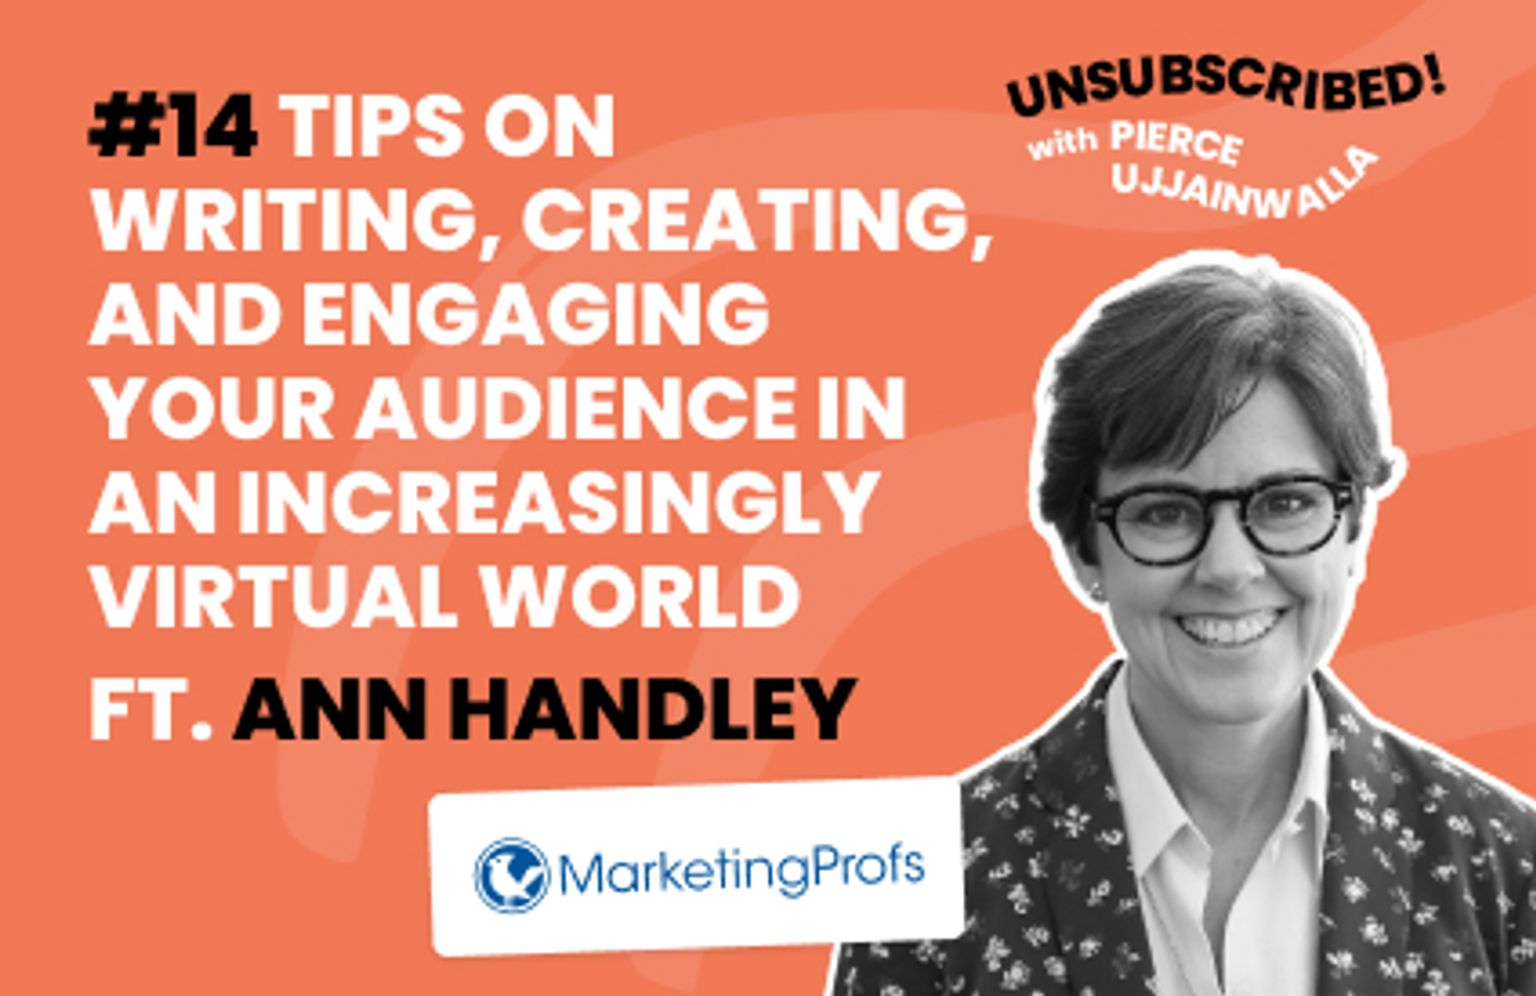 #14 Tips on Writing, Creating, and Engaging Your Audience in an Increasingly Virtual World ft. Ann Handley